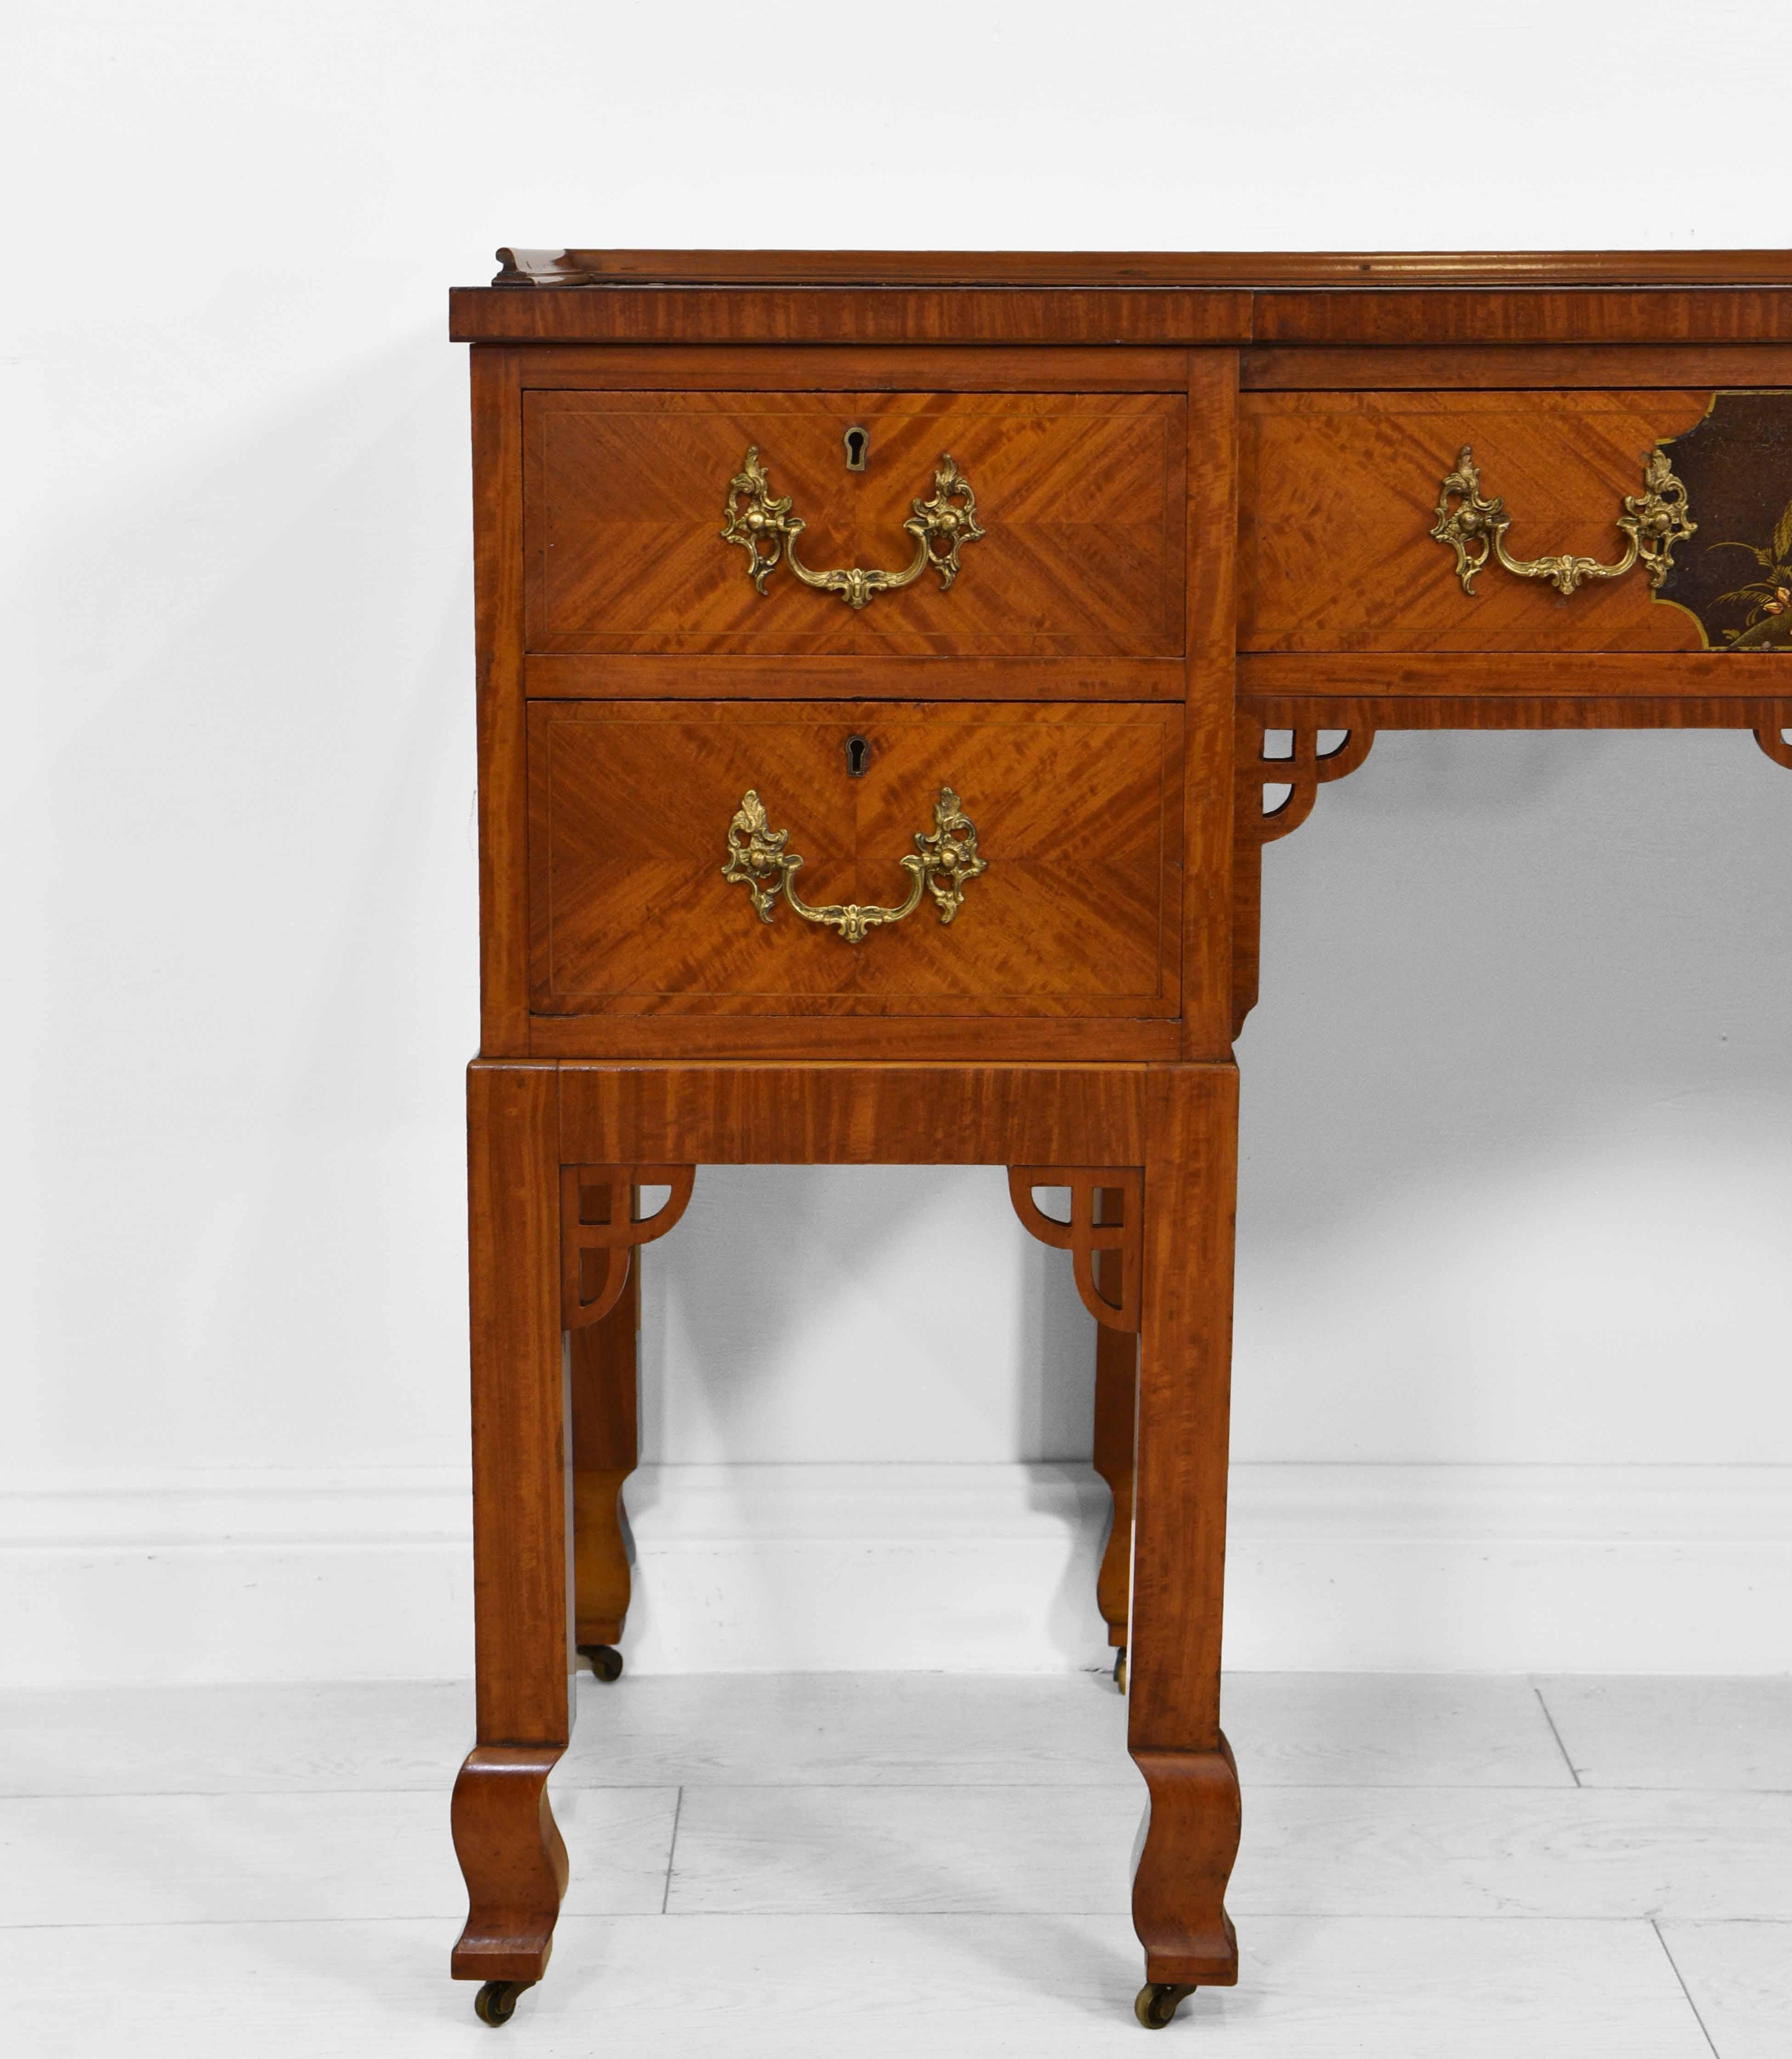 Anglo-Japanese Antique English Satinwood Desk in the Japanese Manner circa 1900 For Sale